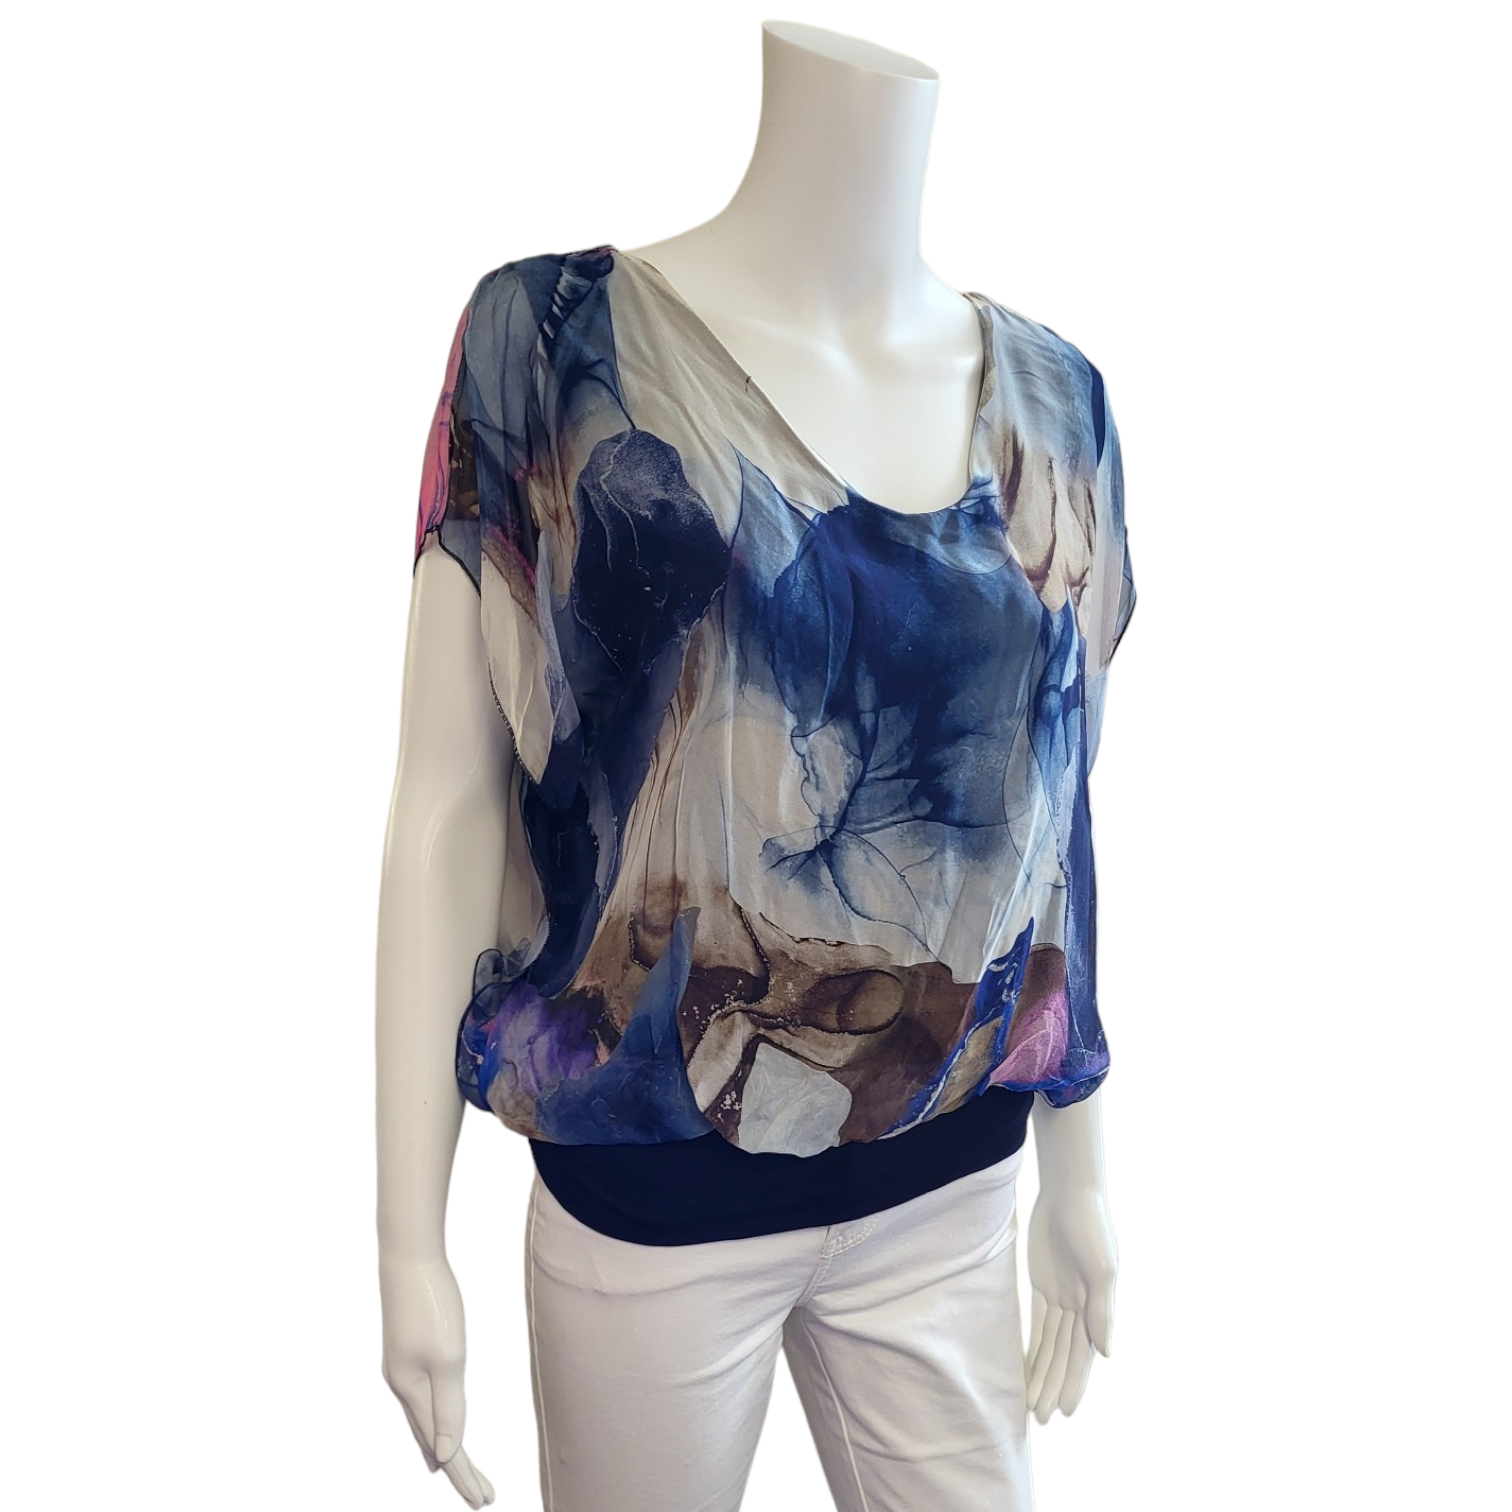 navy blue, cream and pale pink patterned top with short sleeves, silky material